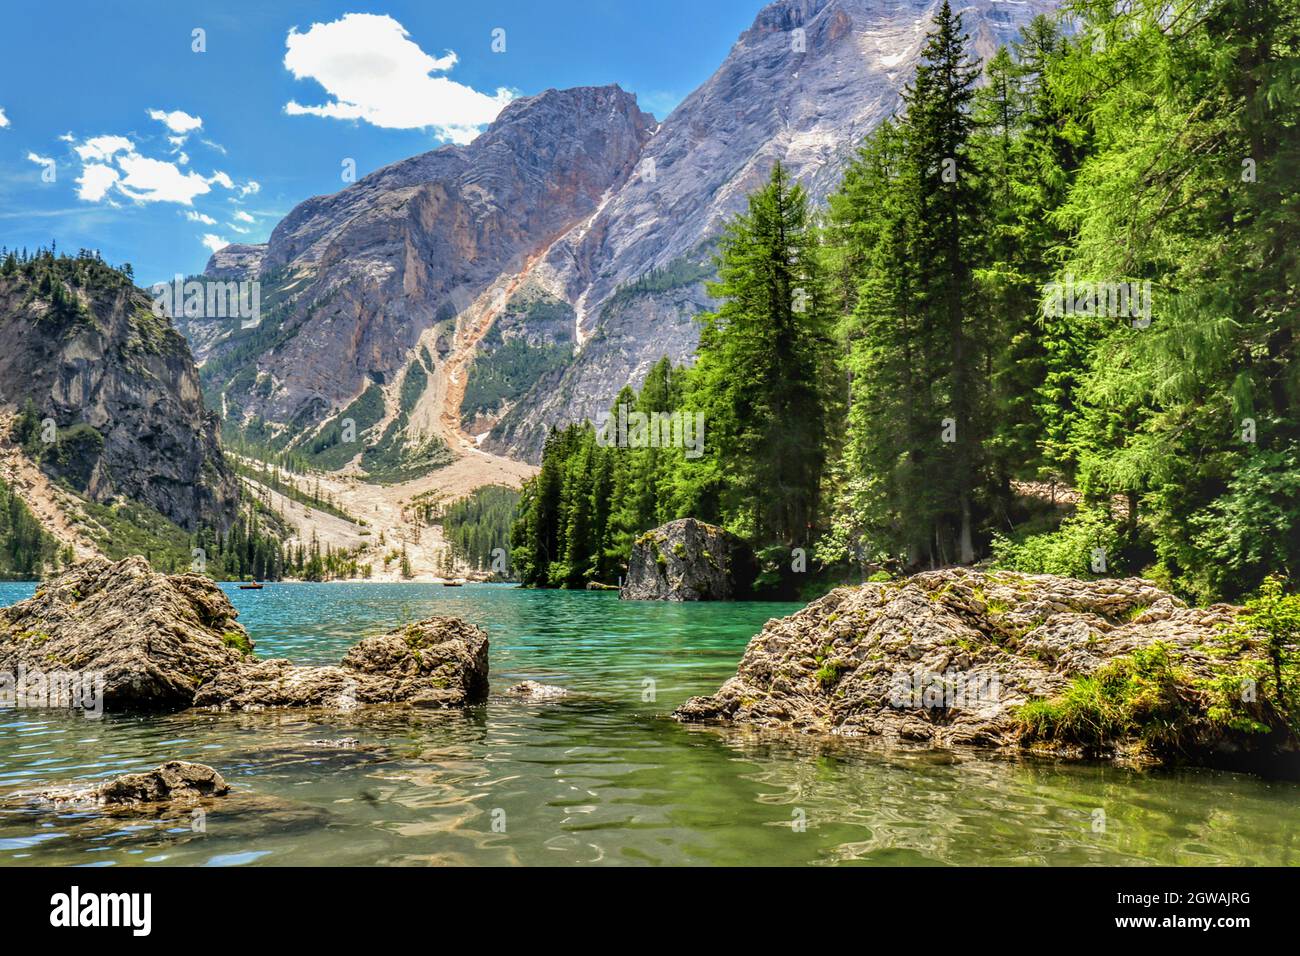 Scenic View Of Lake By Mountains Against Sky Stock Photo